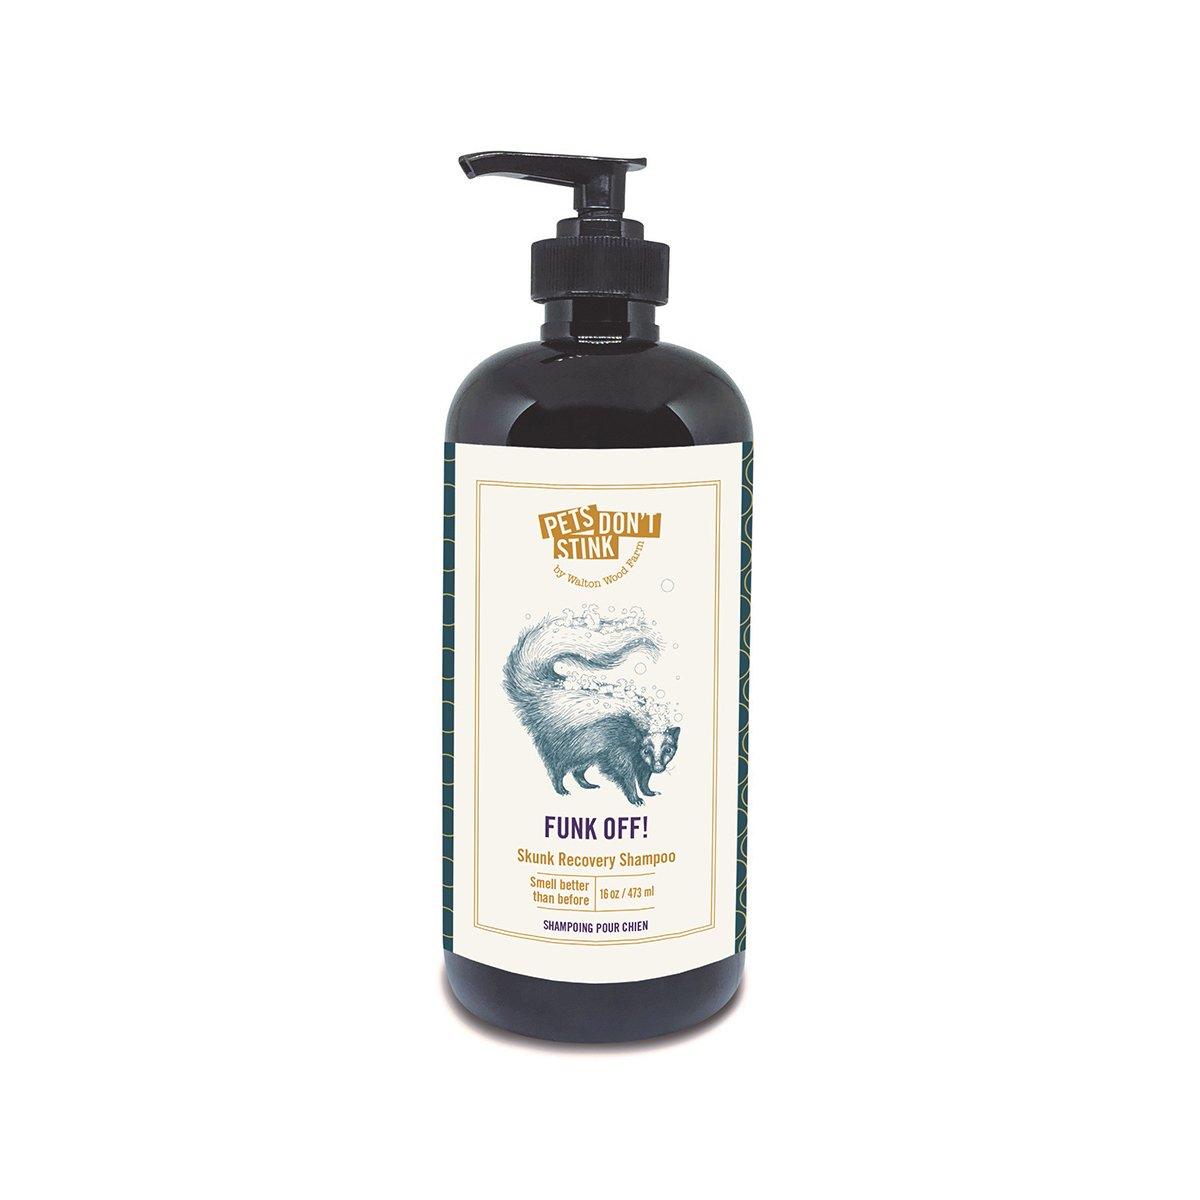 Funk Off! Skunk Recovery Shampoo - The Wandering Merchant